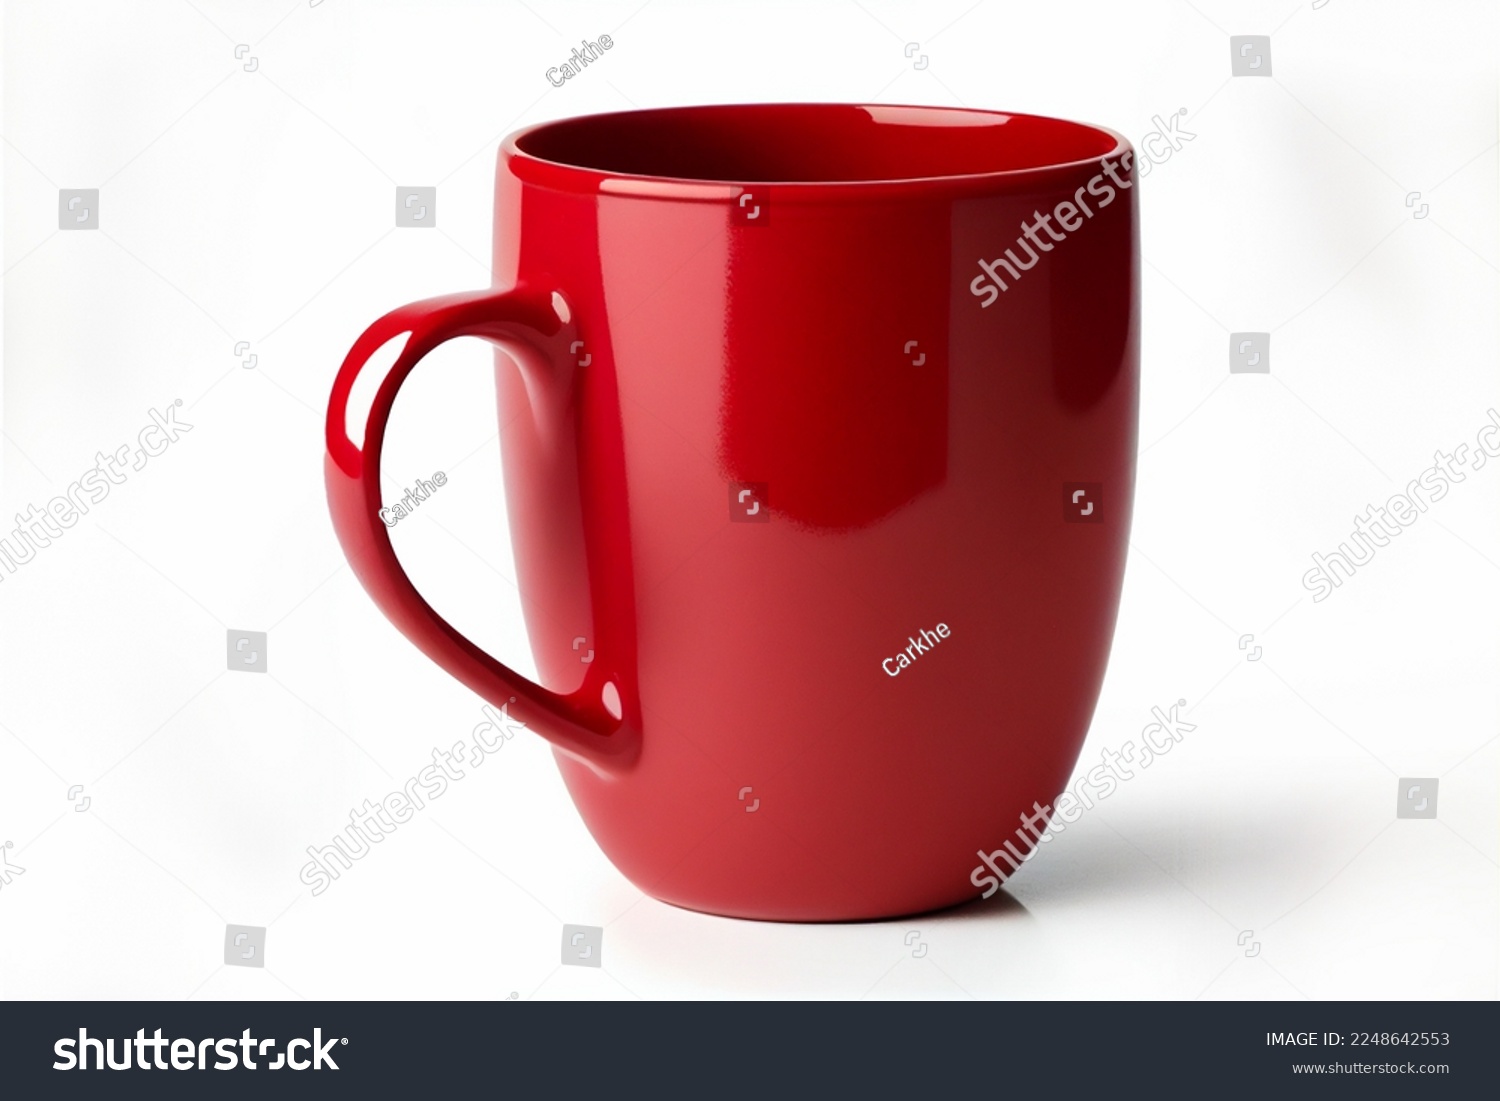 Close up huge red mug. Red cup for tea or soup isolated on white background with clipping path. Red coffee cup mockup. #2248642553